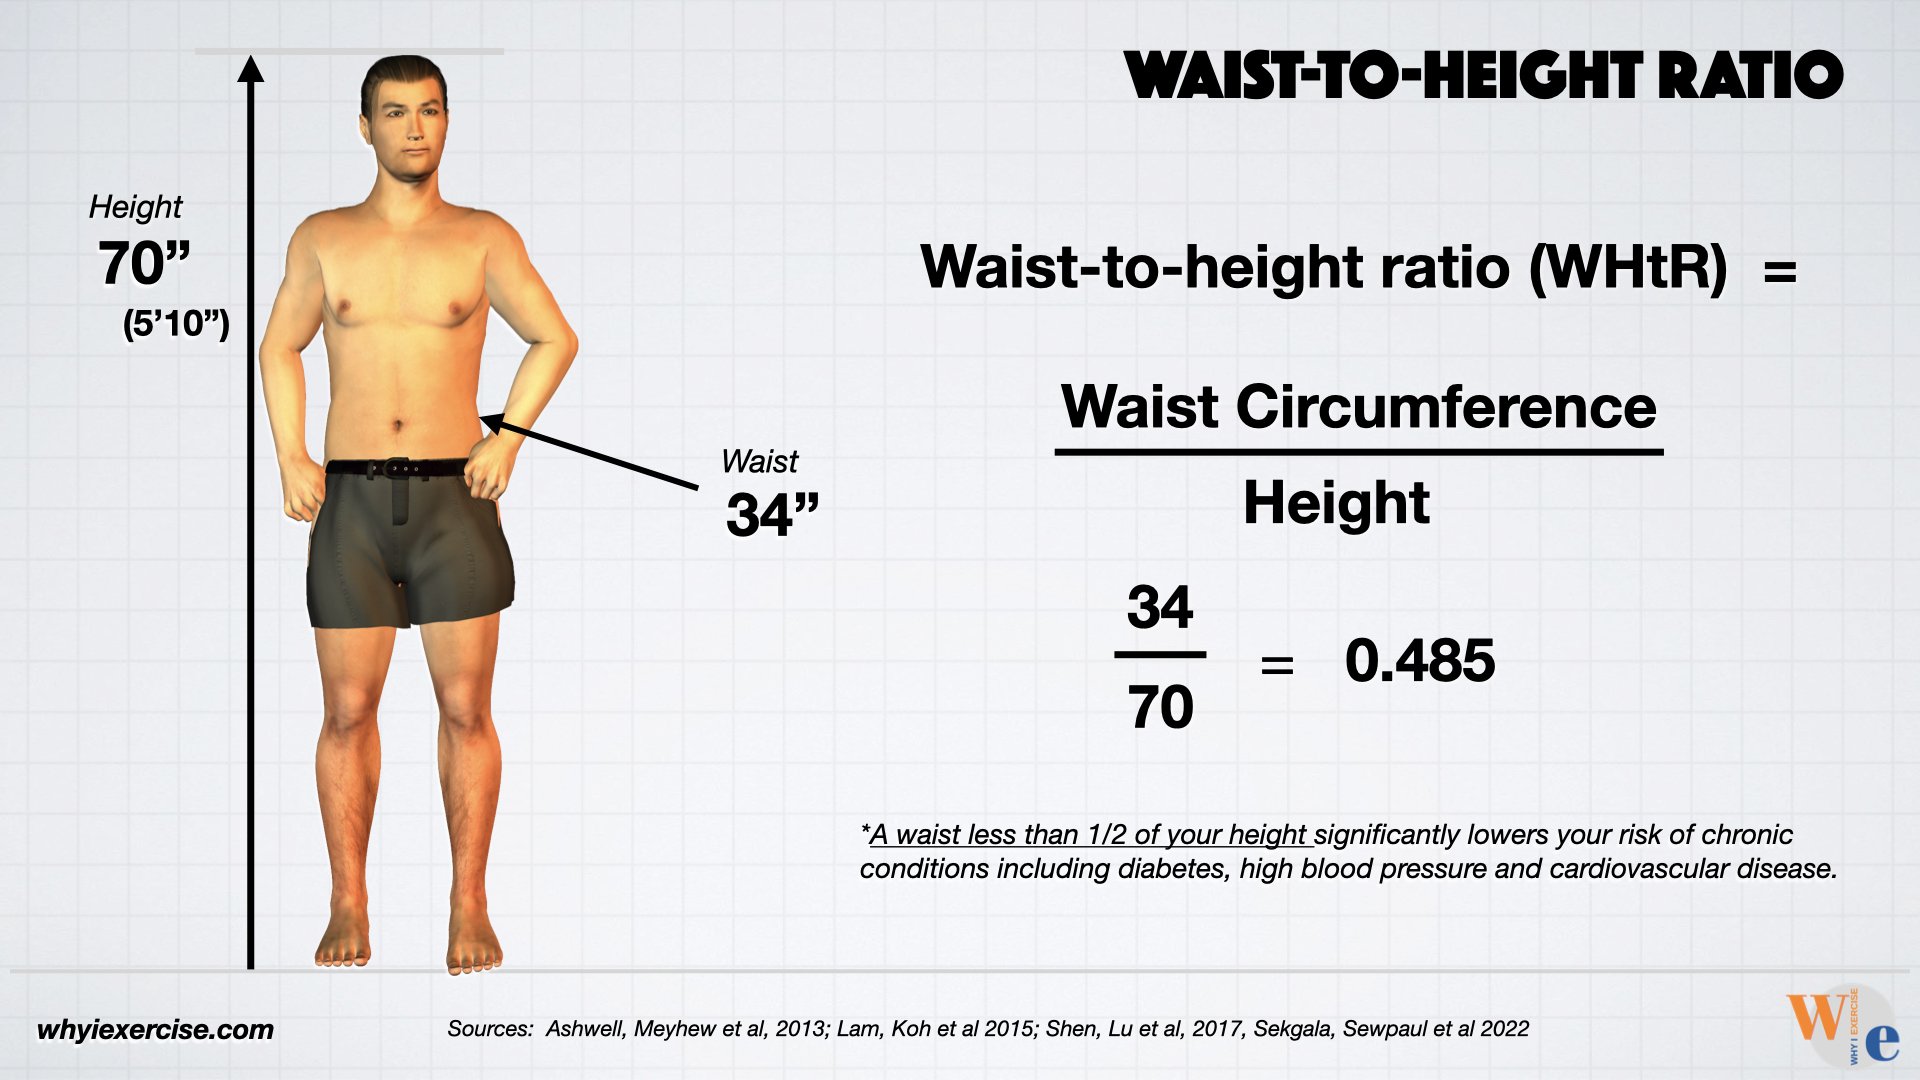 Waist-to-height ratio: waist less than 1/2 of your height